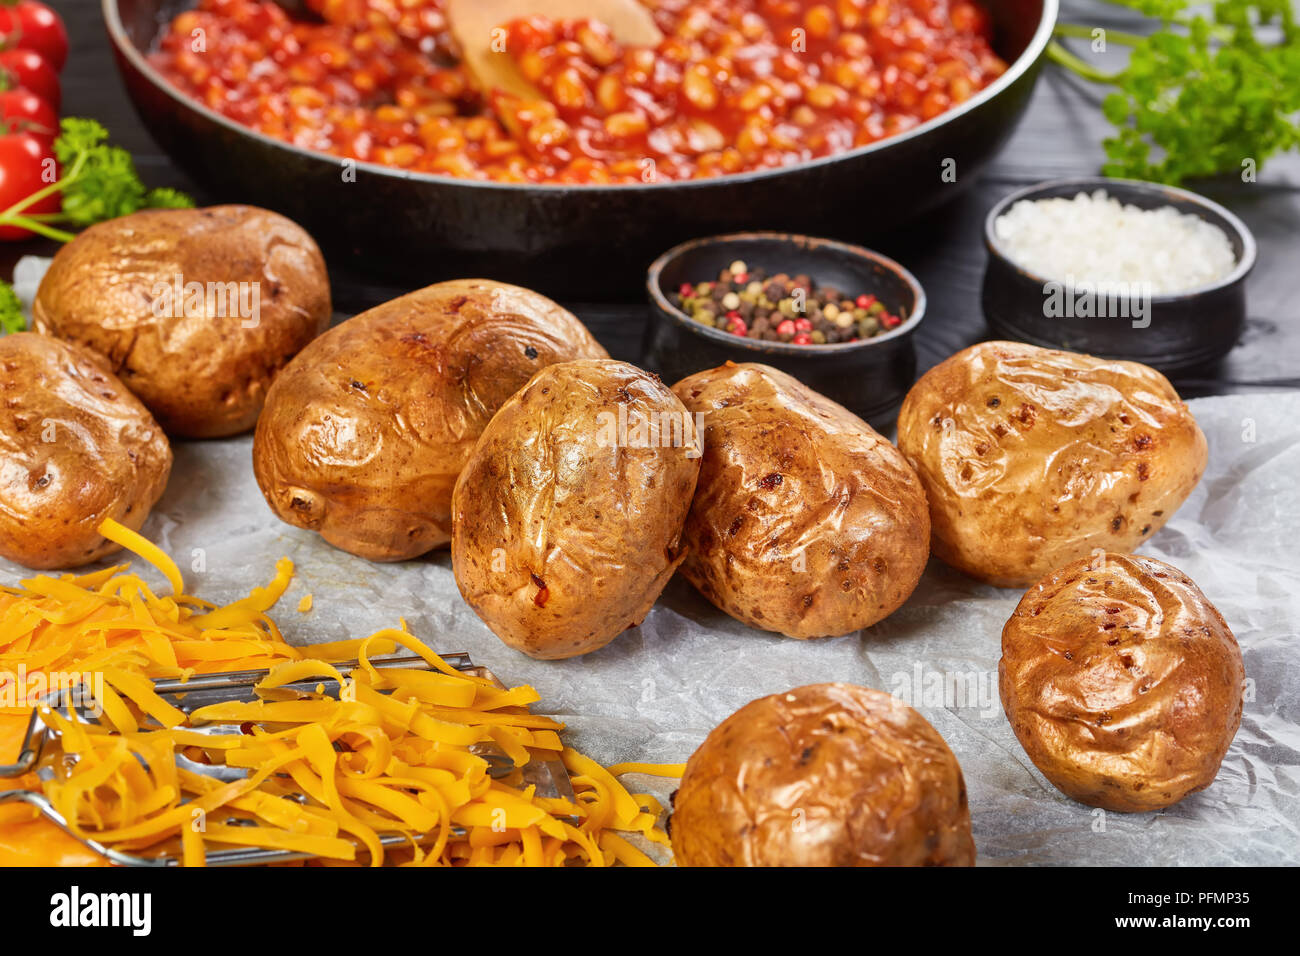 baked potato with grated cheese on paper Stock Photo